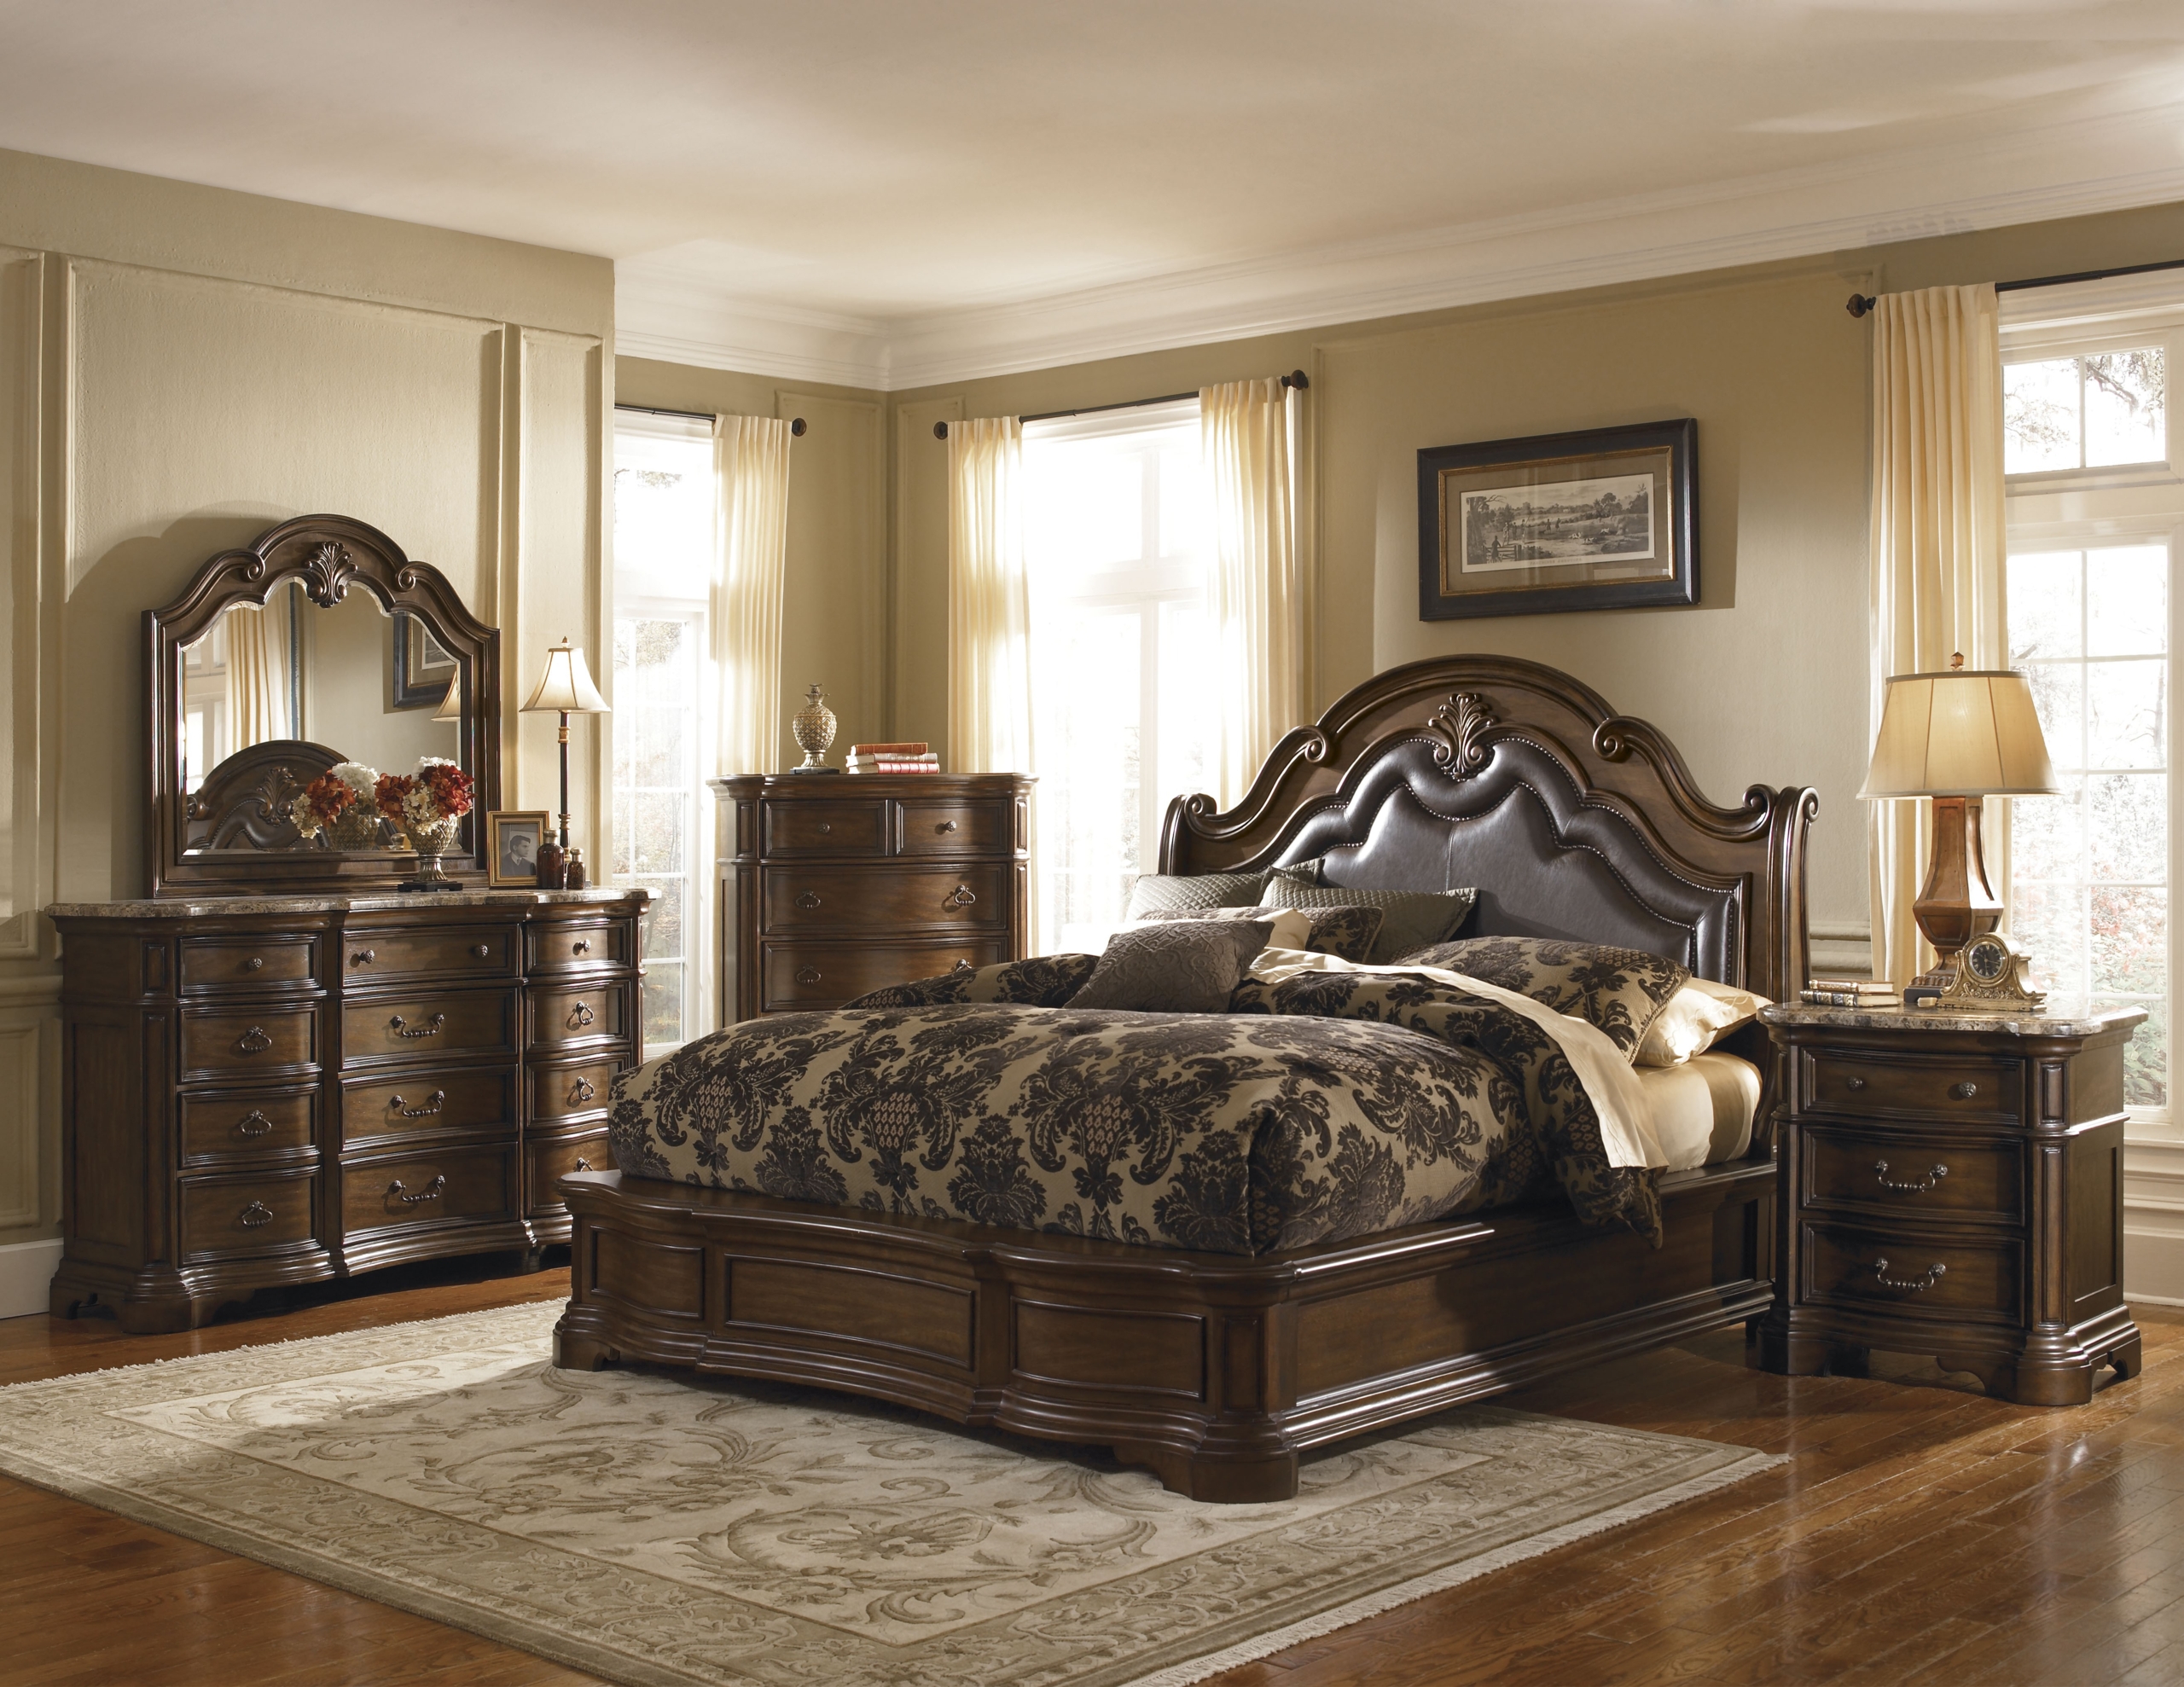 Marilyn collection bedroom set